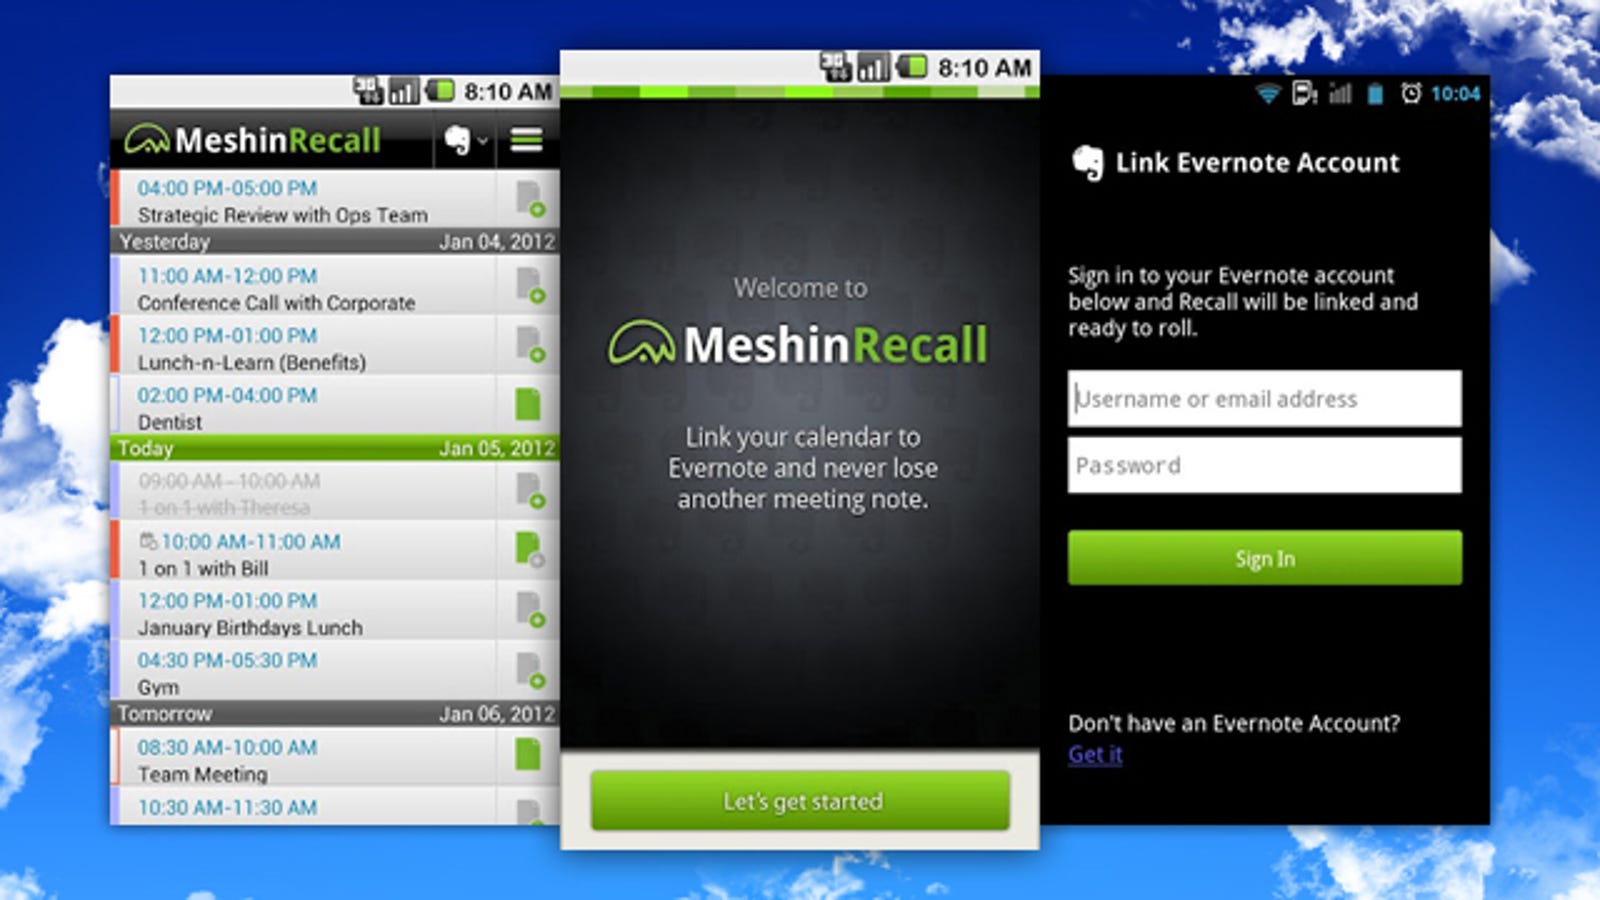 Meshin Recall Organizes Multiple Google Calendars and Evernote in One